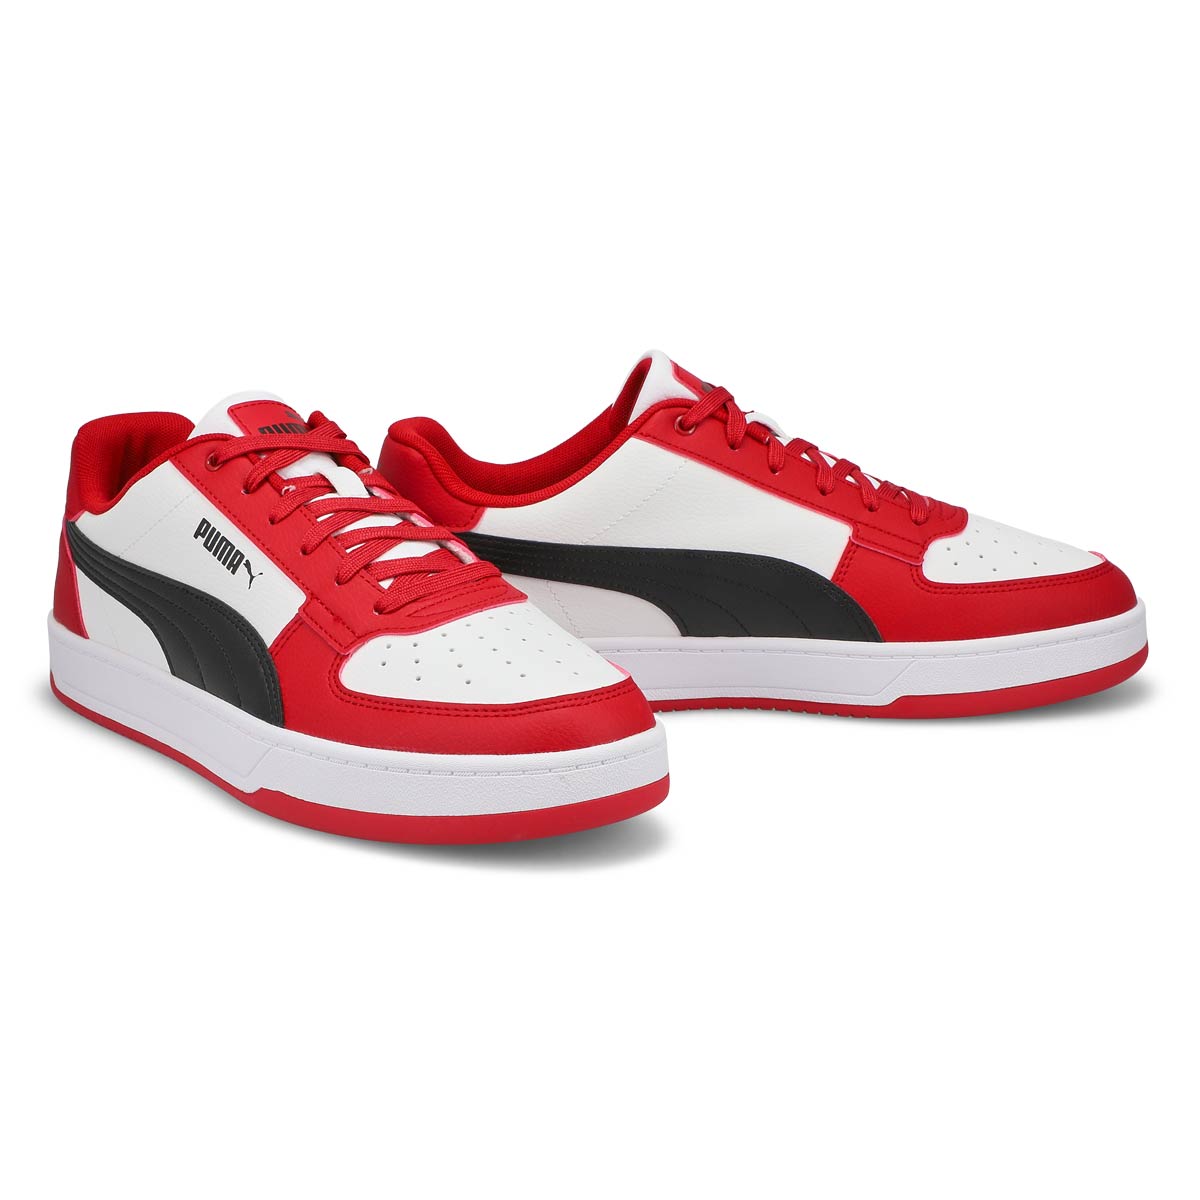 Mens Caven 2.0 Lace Up Sneaker - Red/White/Black